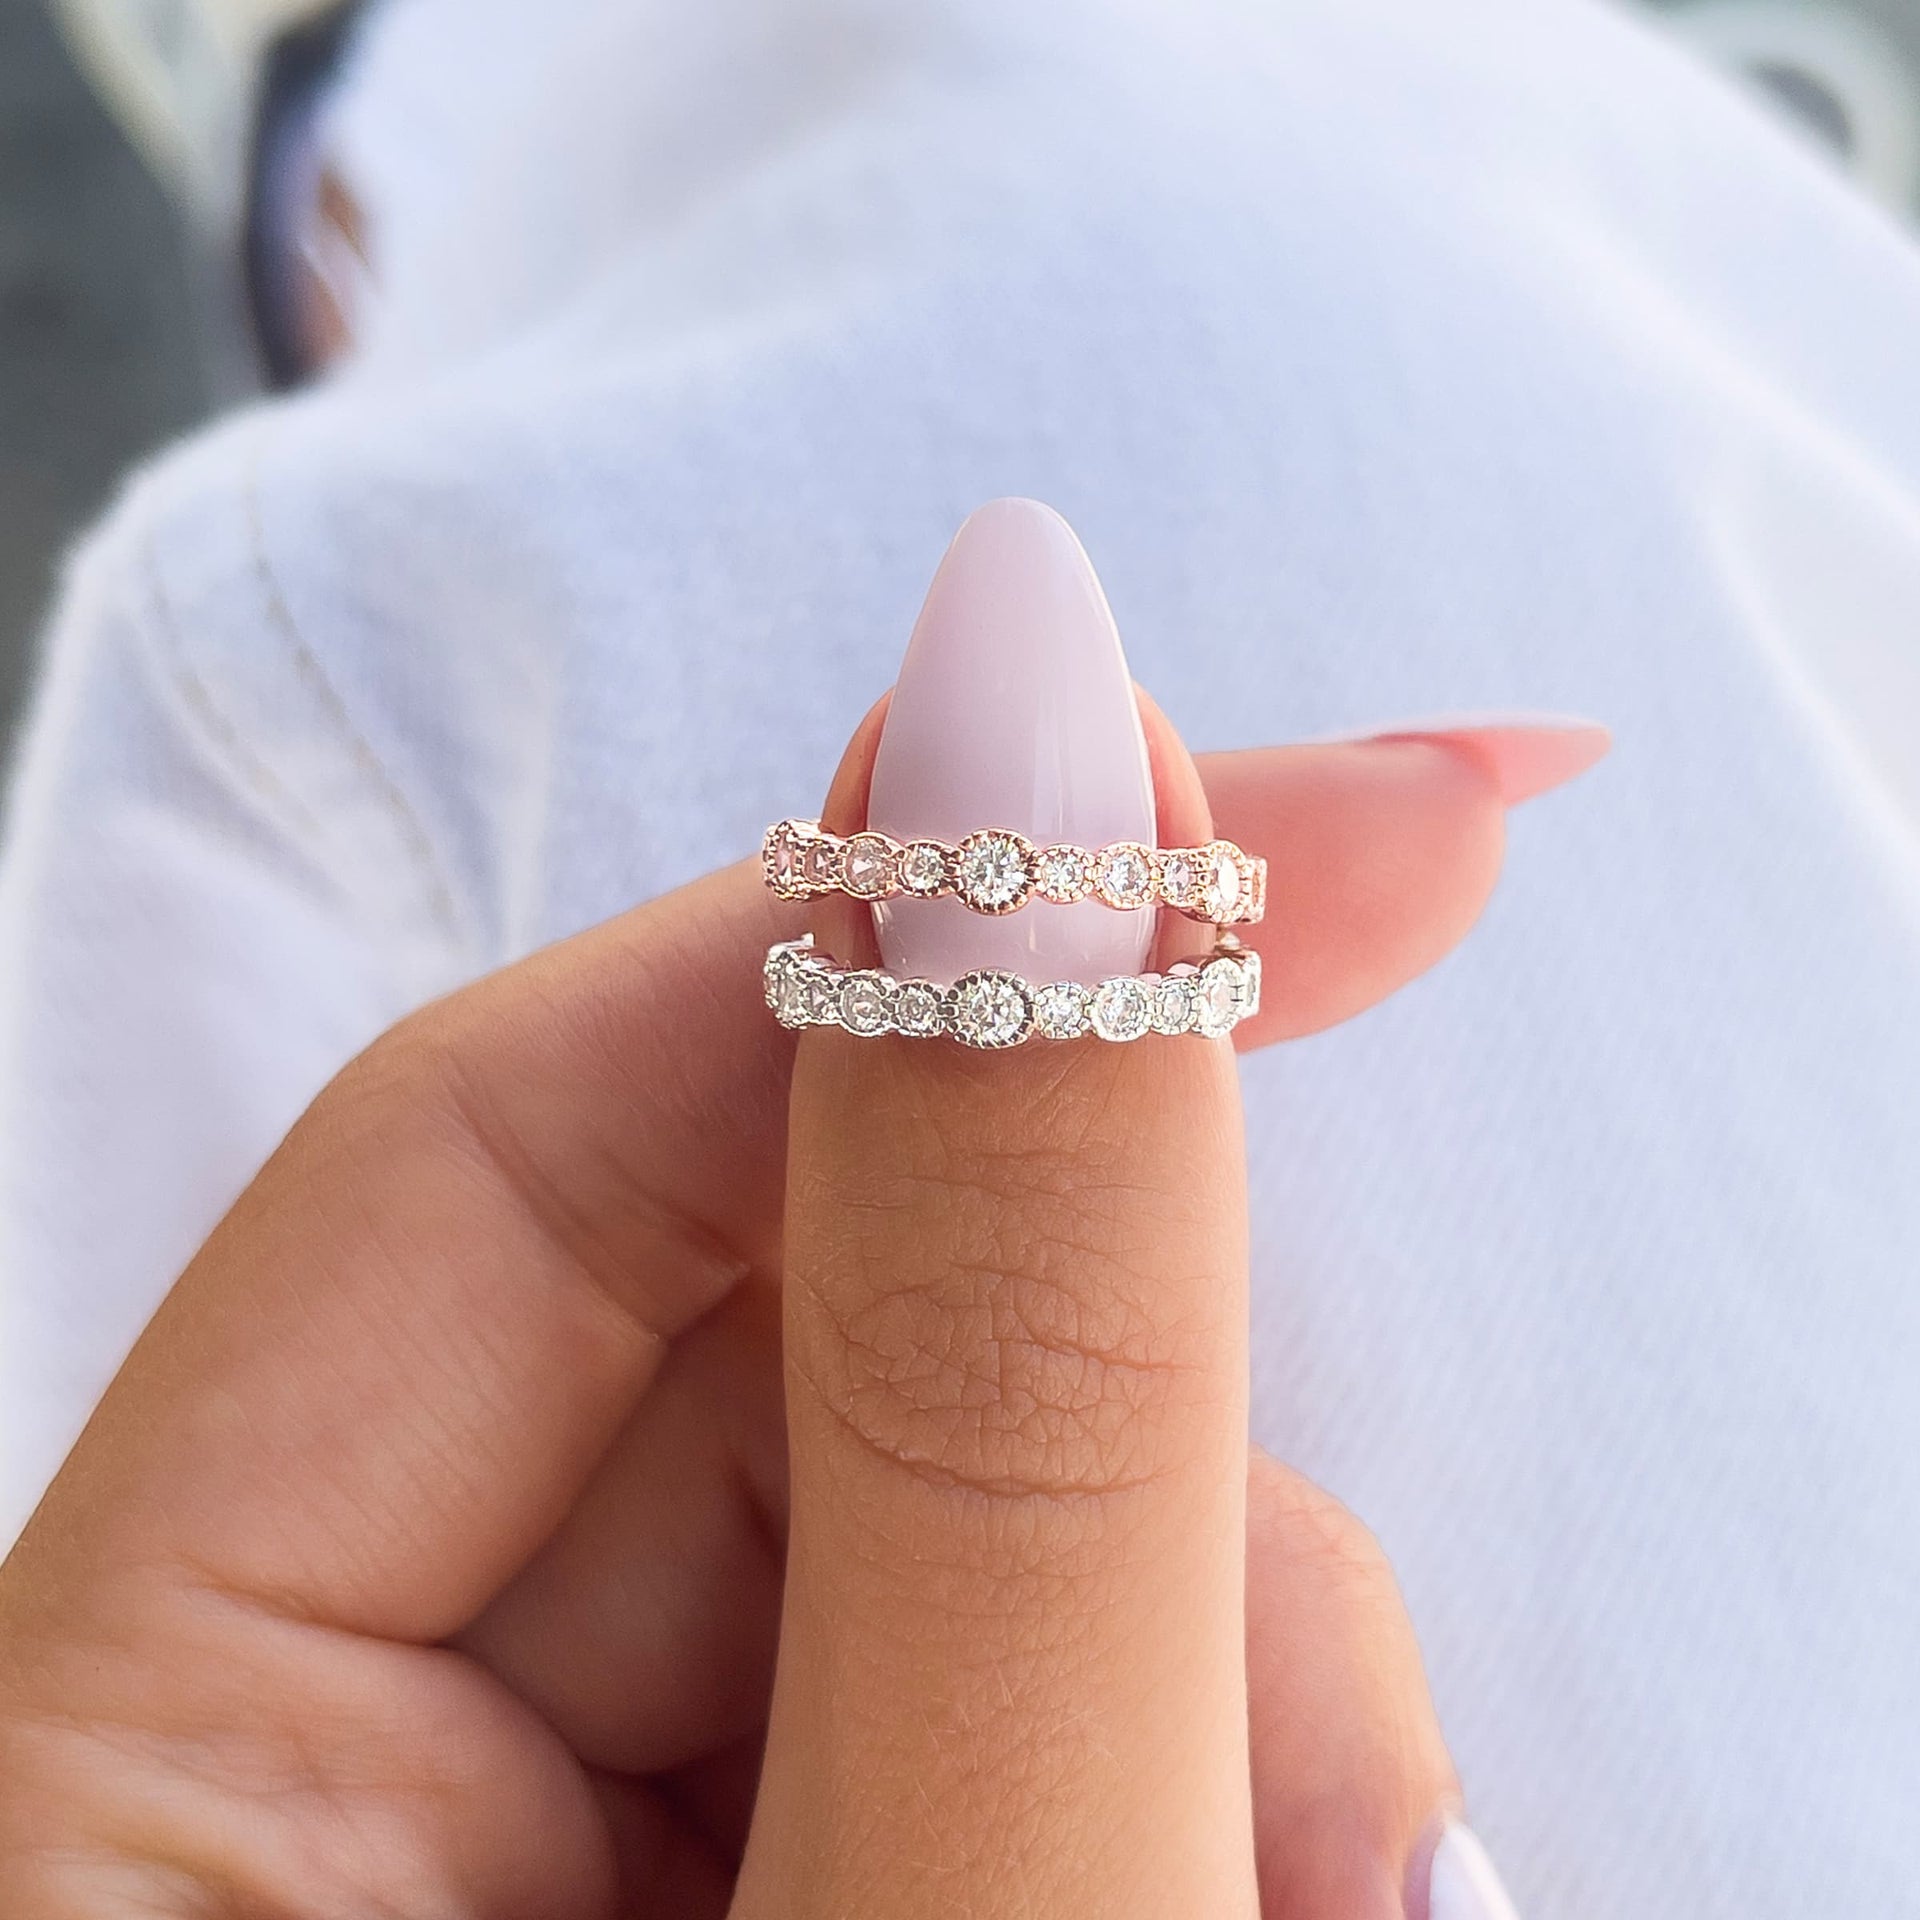 unique alternating stone size eternity wedding bands shown in silver and rose gold by model with light pink nails